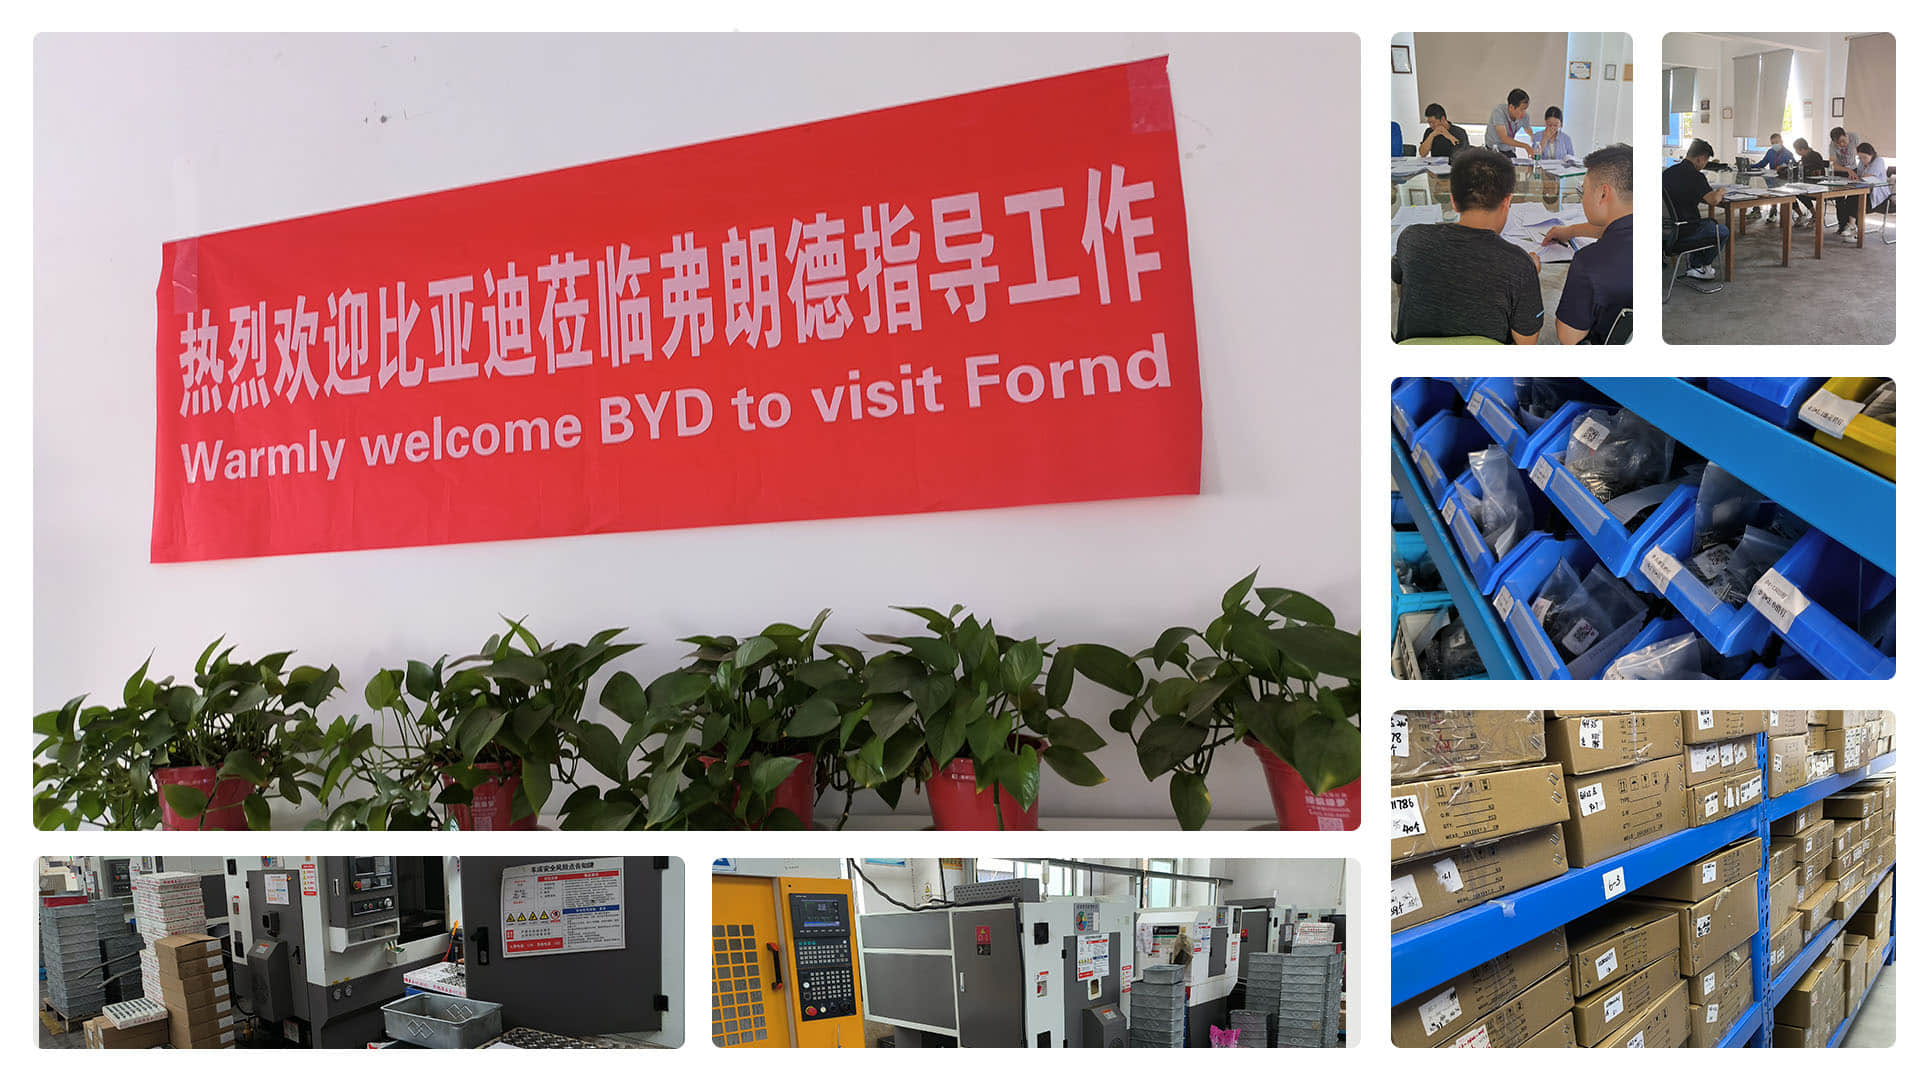 【Factory Inspection】-BYD delegation in-depth rigorous audit of the factory